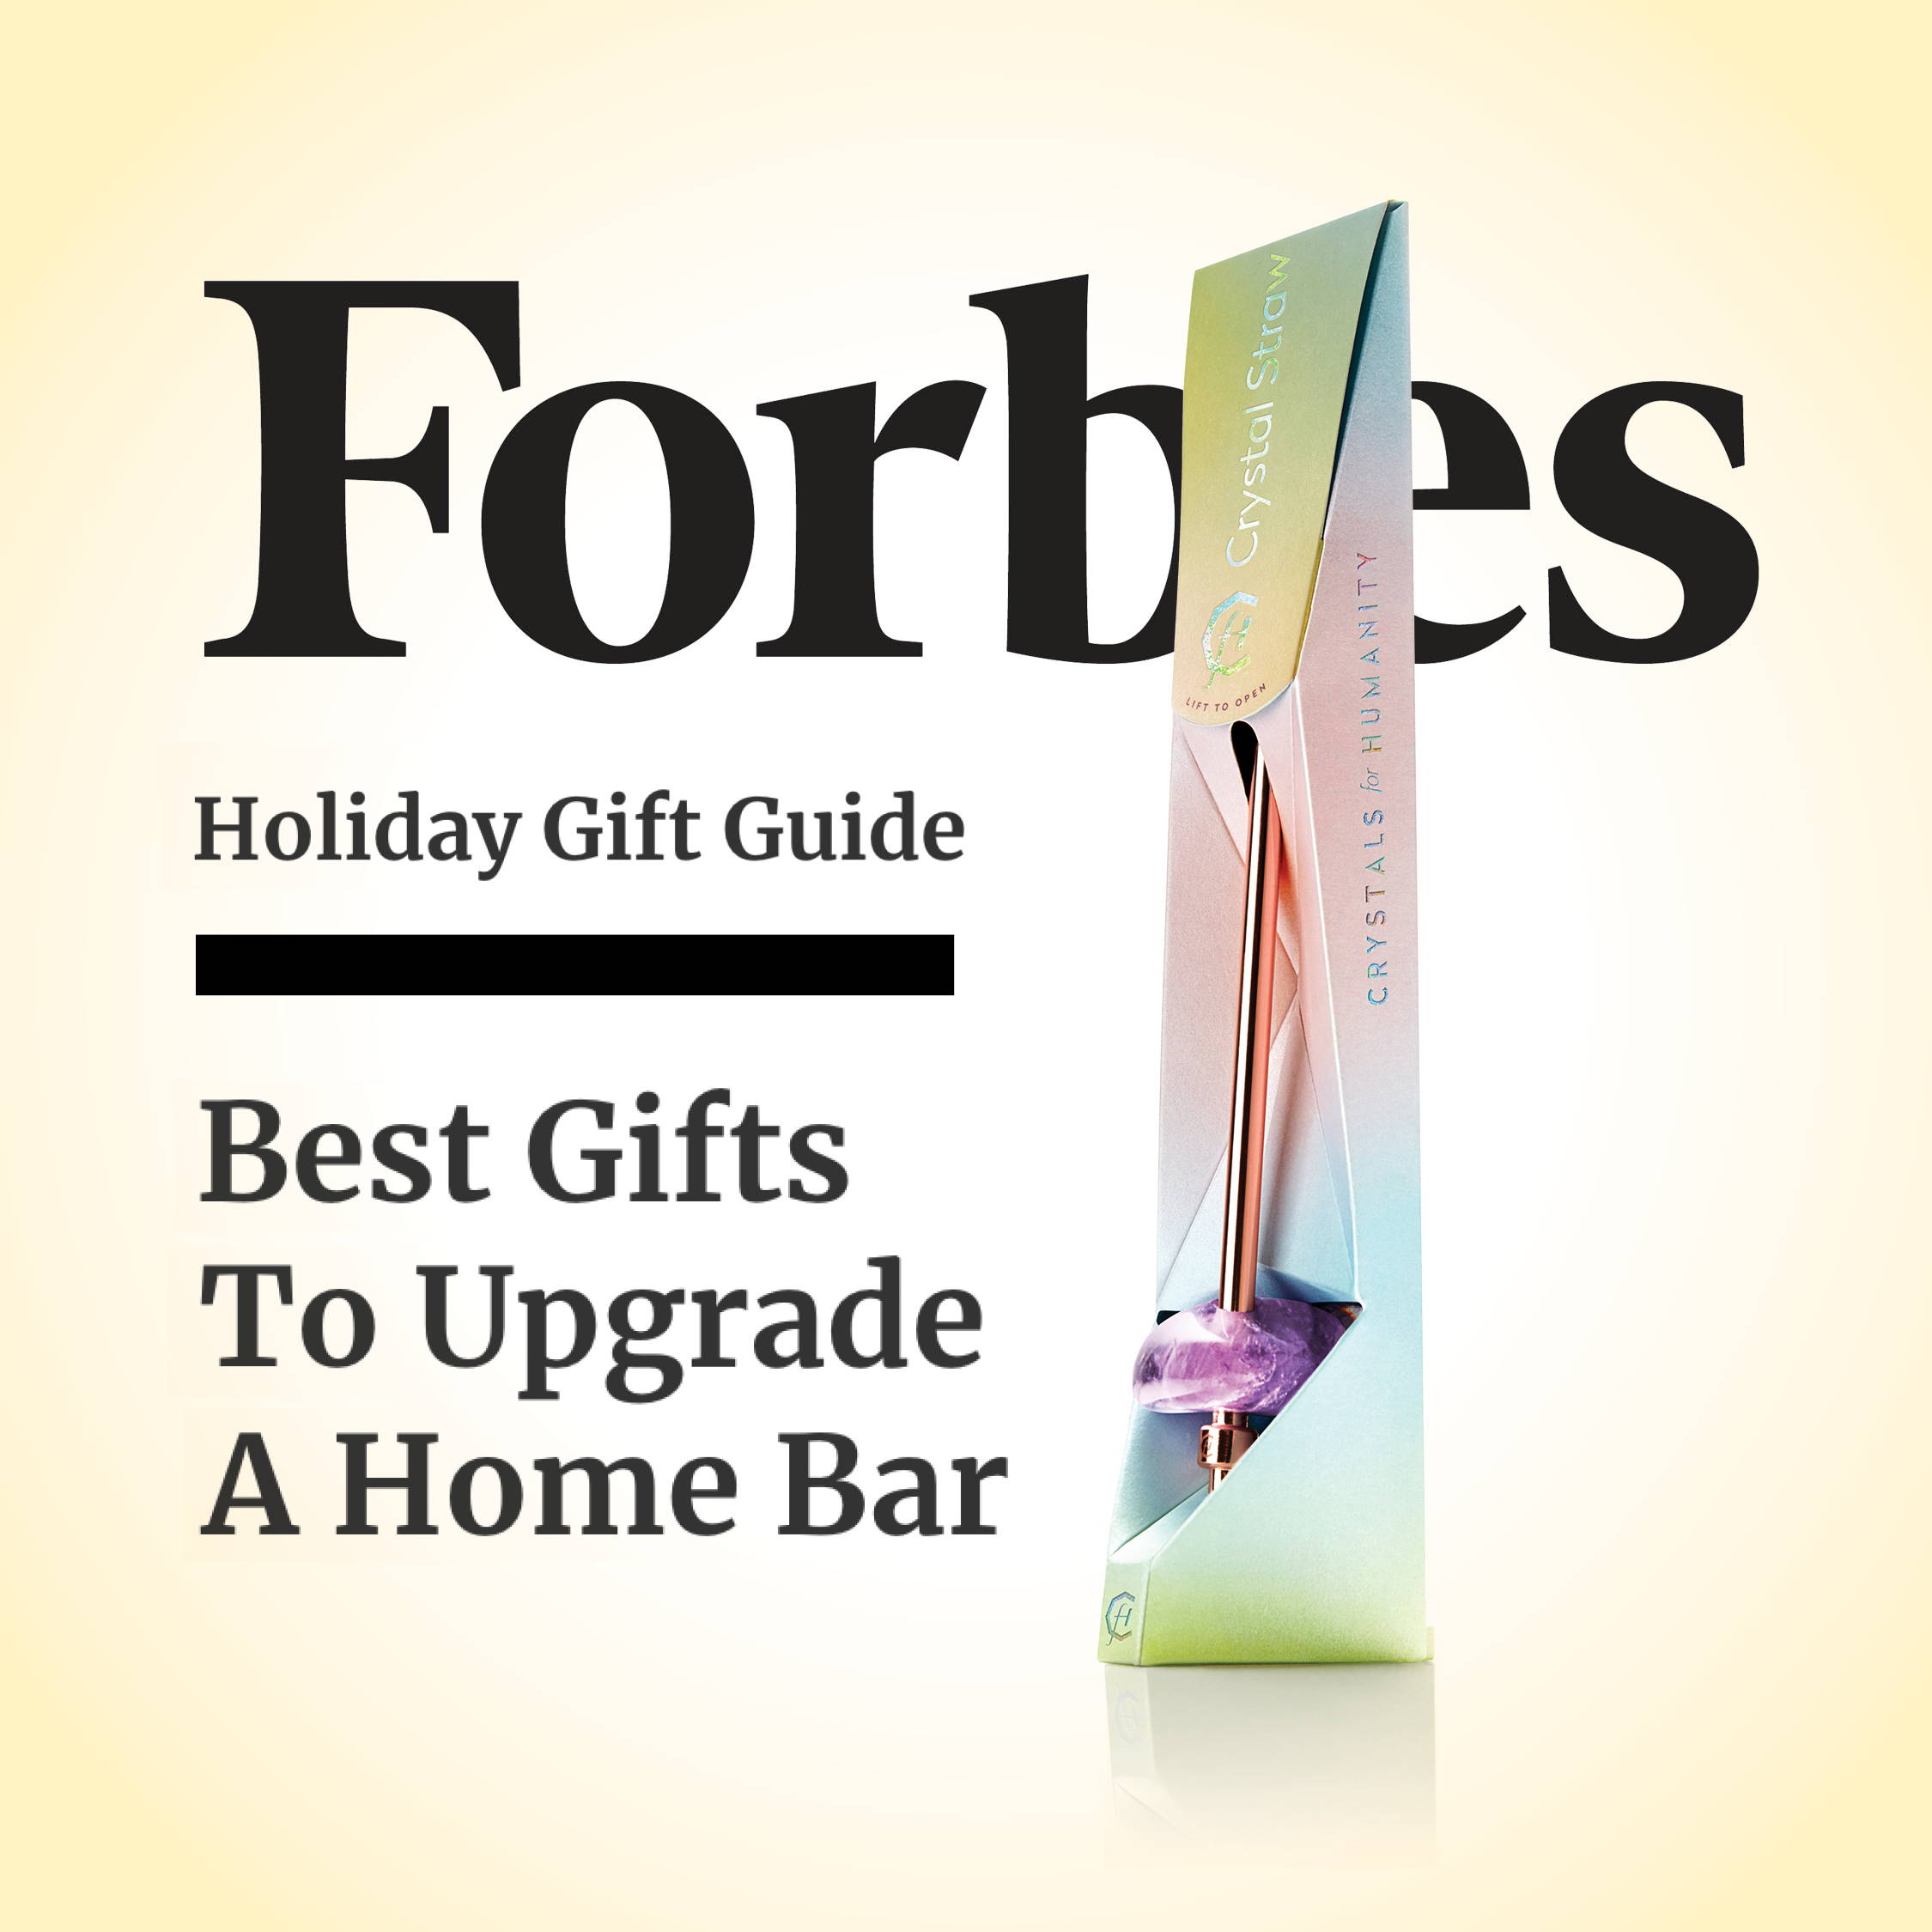 Forbes Holiday Gift Guide 2019: Best Gifts To Upgrade A Home Bar